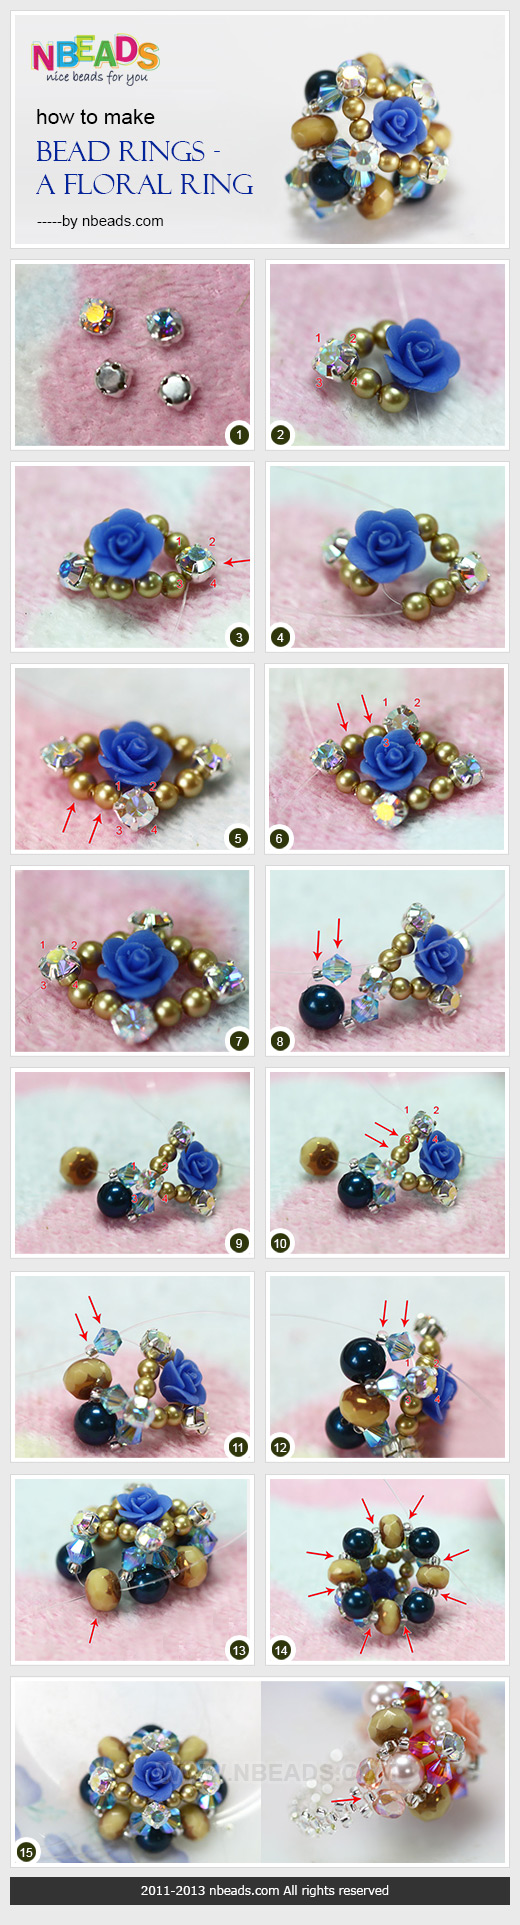 how to make bead rings - a floral ring